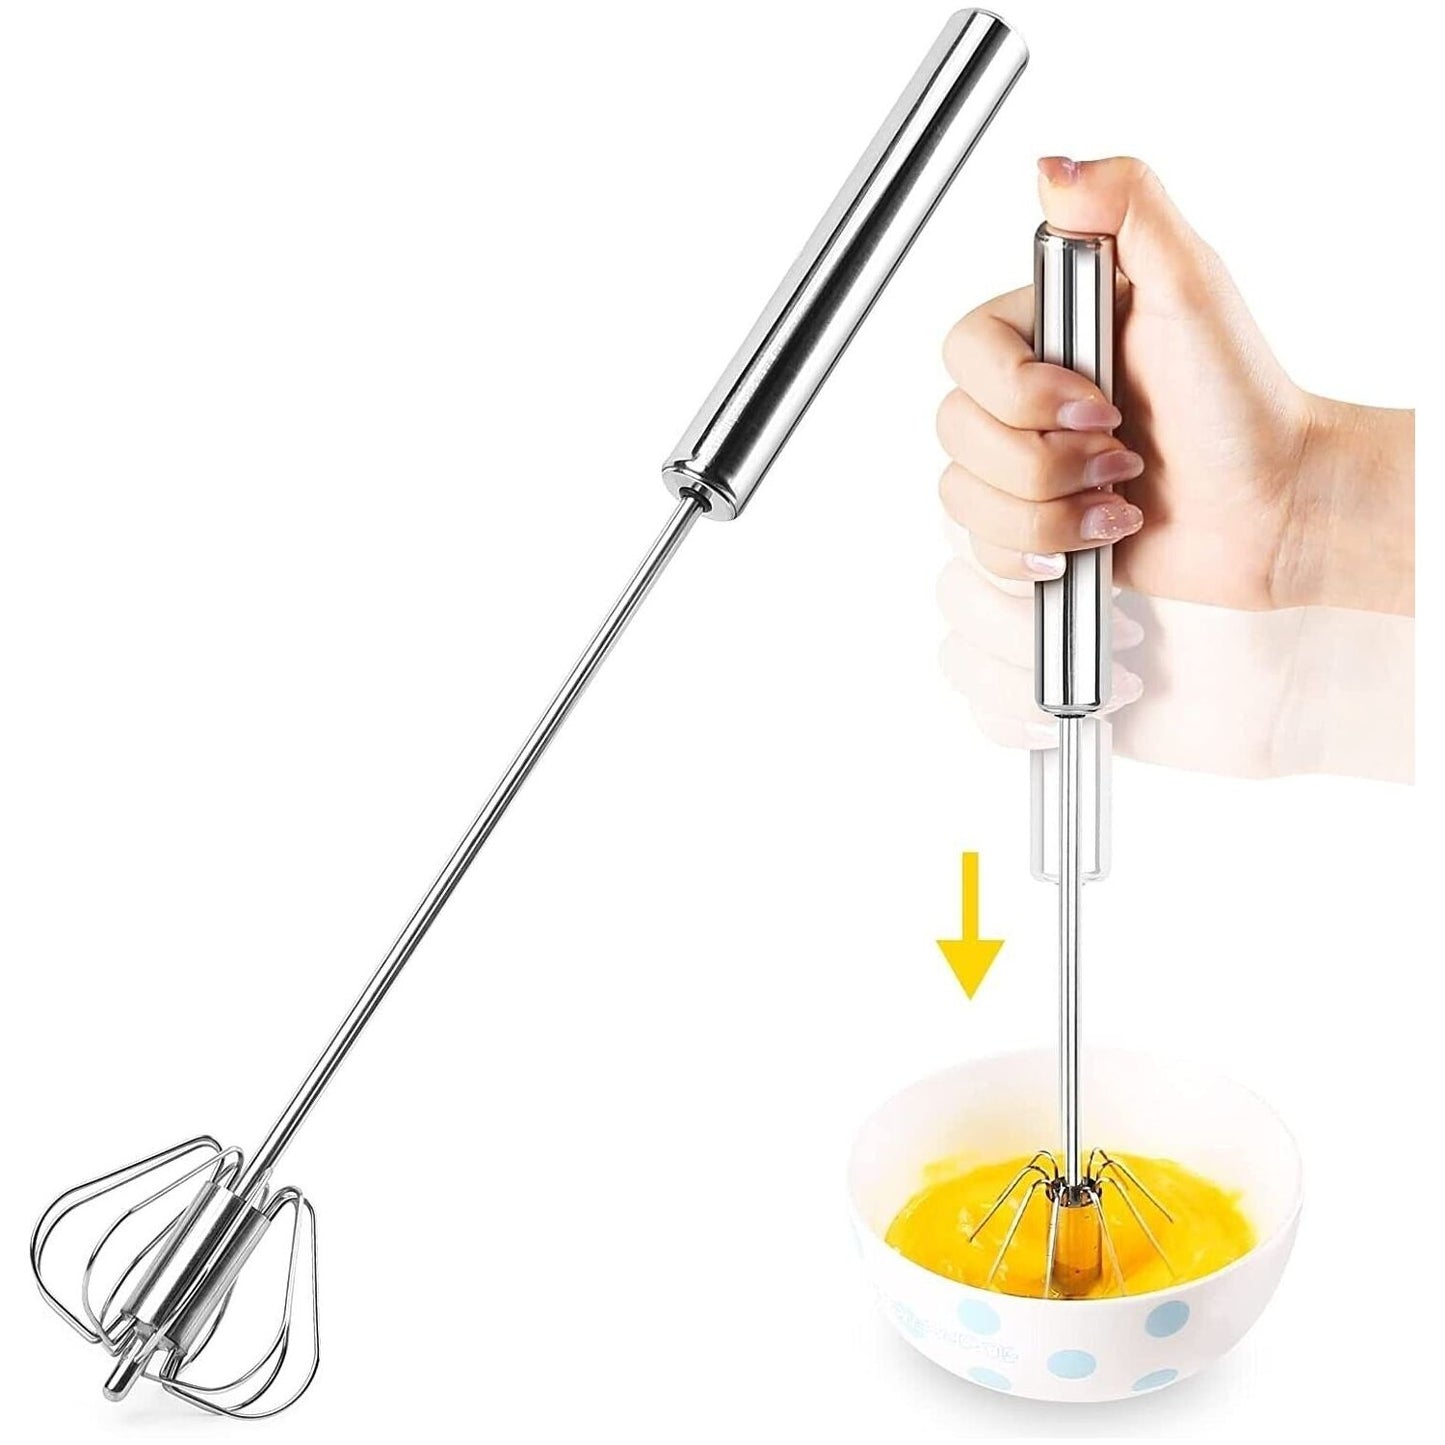 Semi-Automatic Stainless Steel  Mixer Whisk